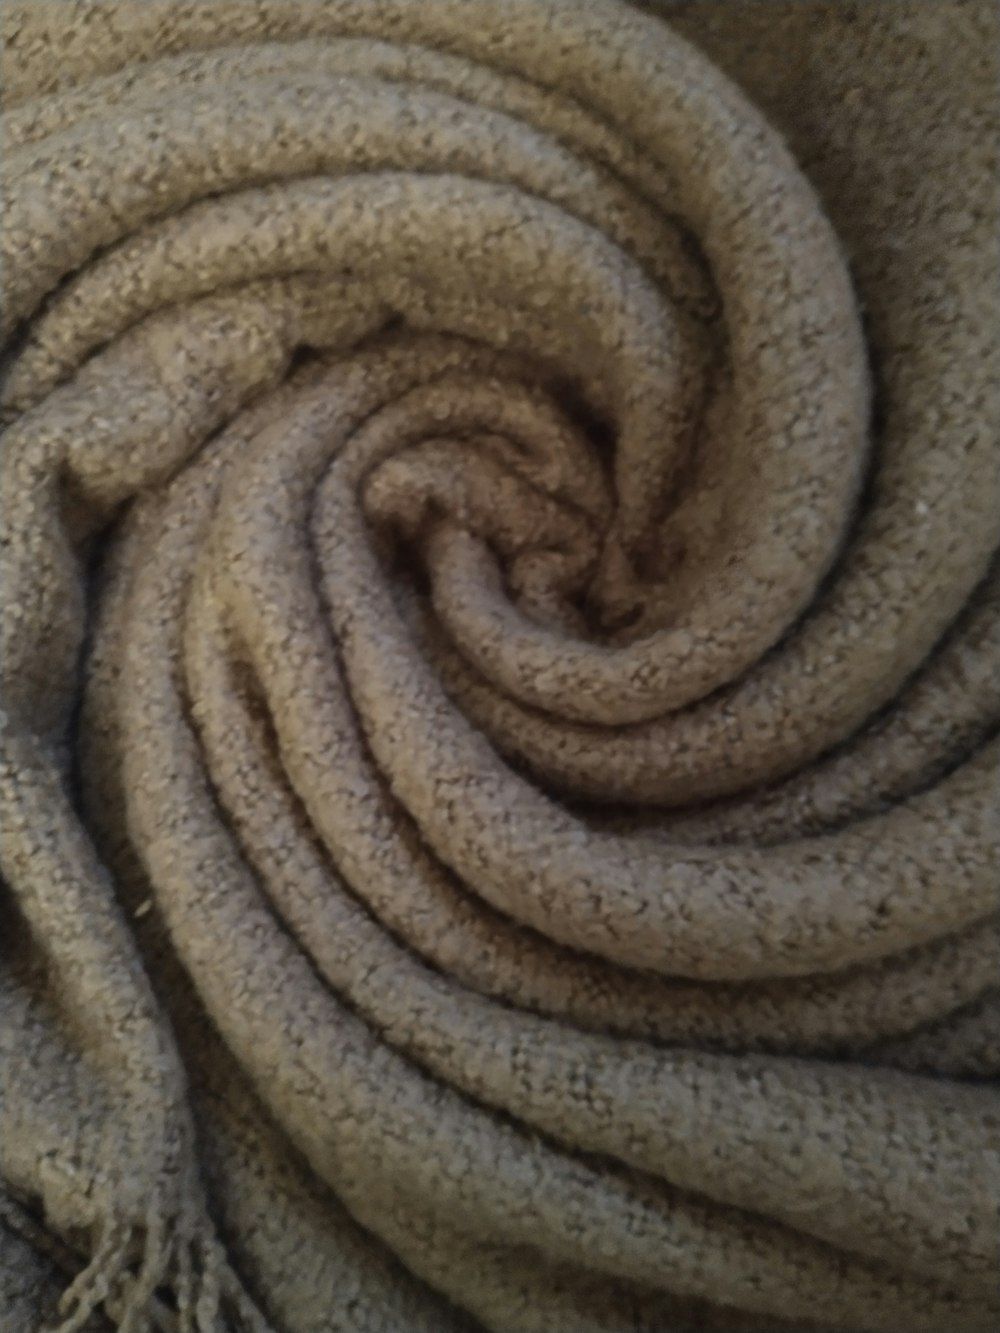 a close up of a blanket with a knot on it